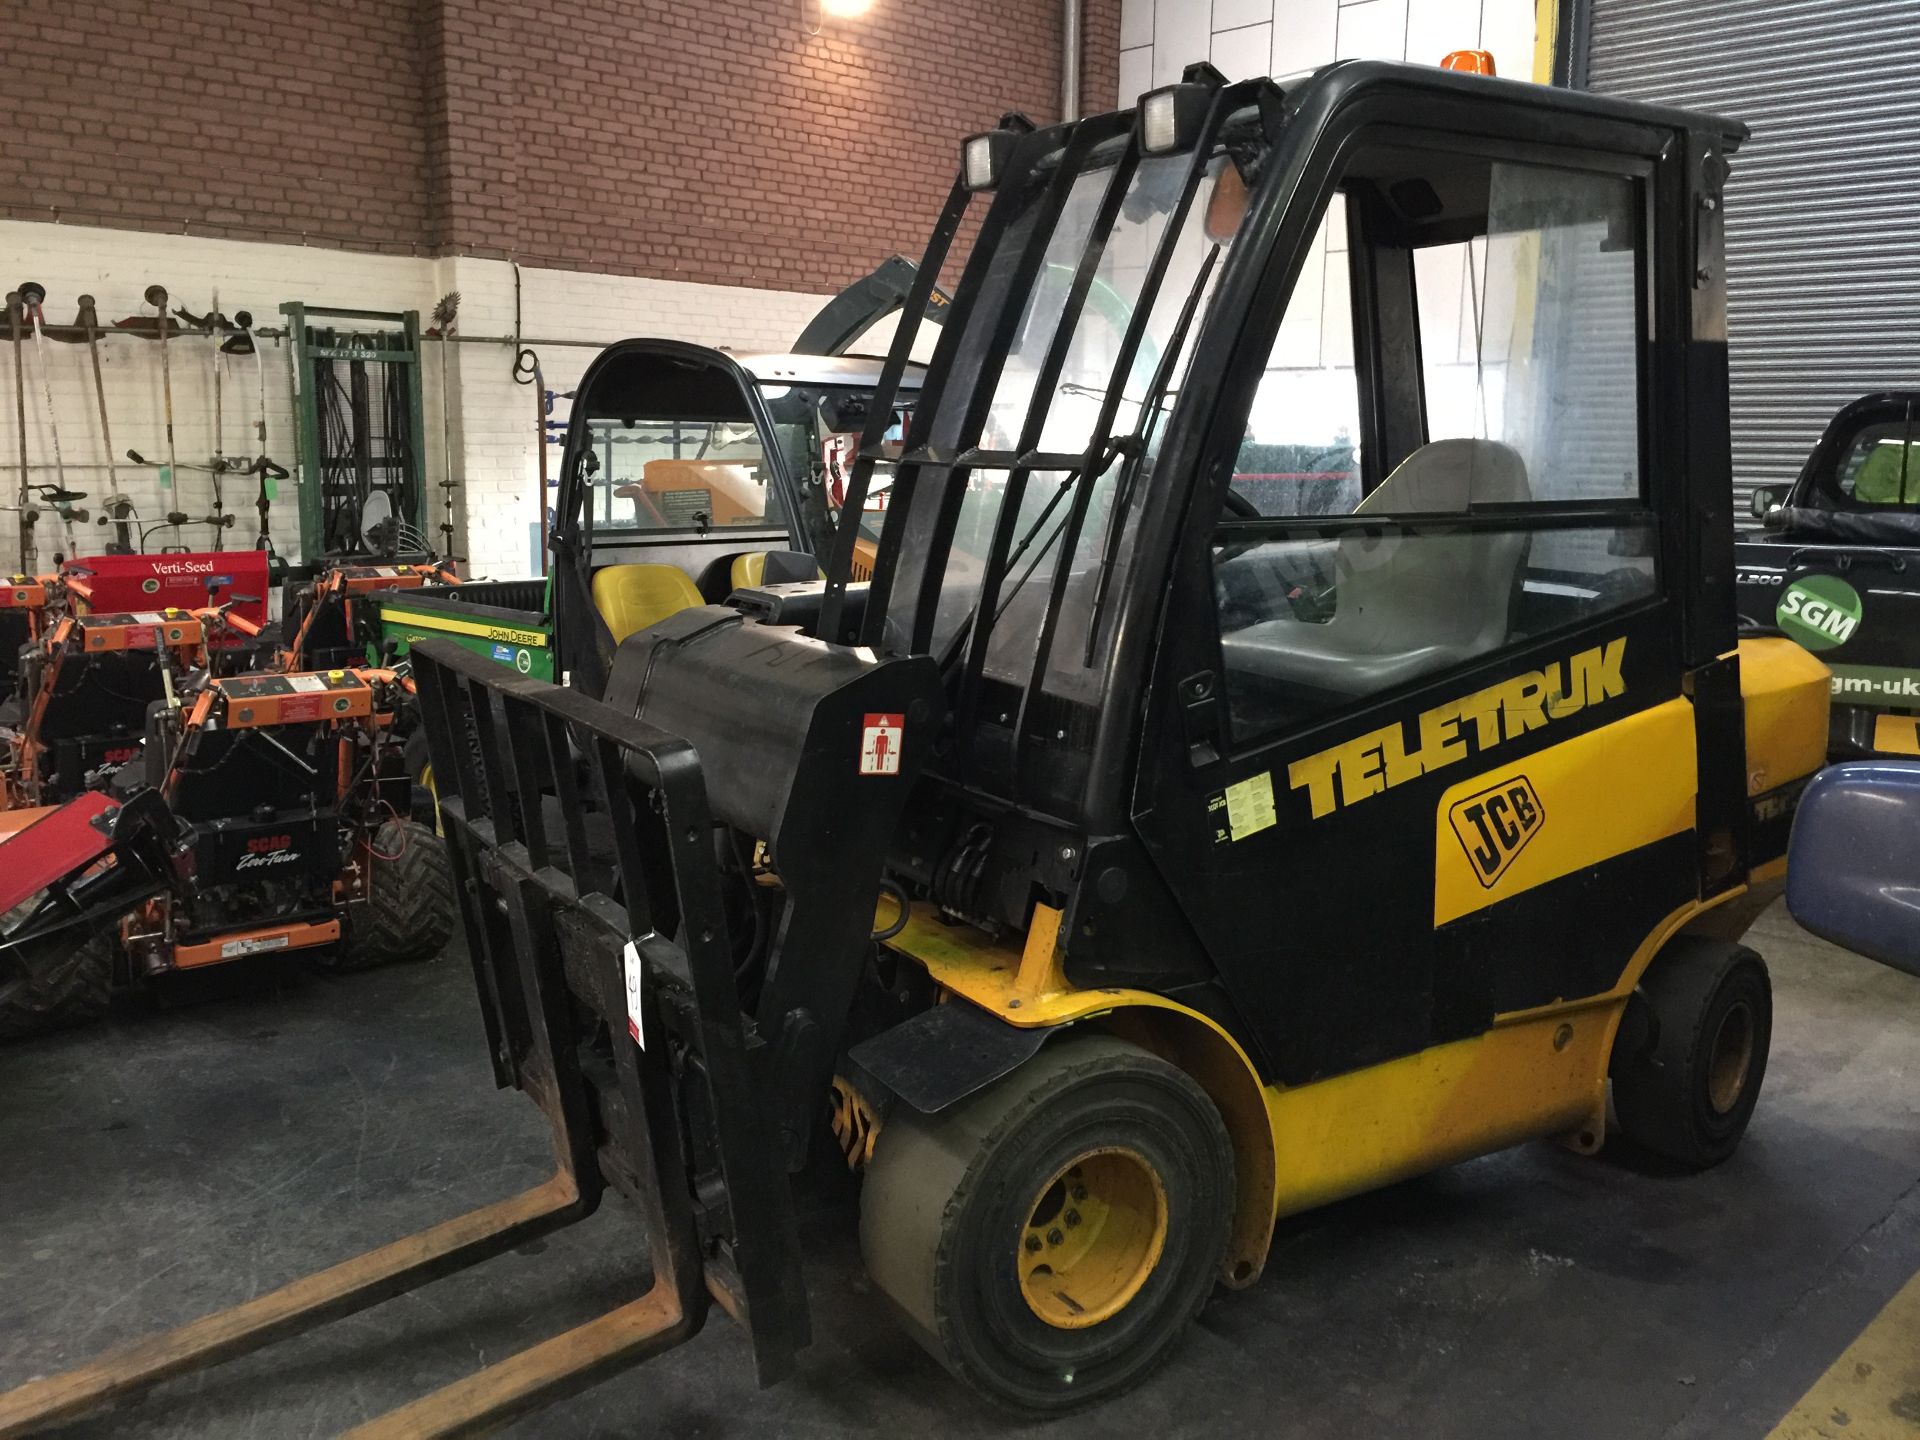 JCB TLT30 Teletruk counterbalance forklift with telescopic boom - Image 4 of 22